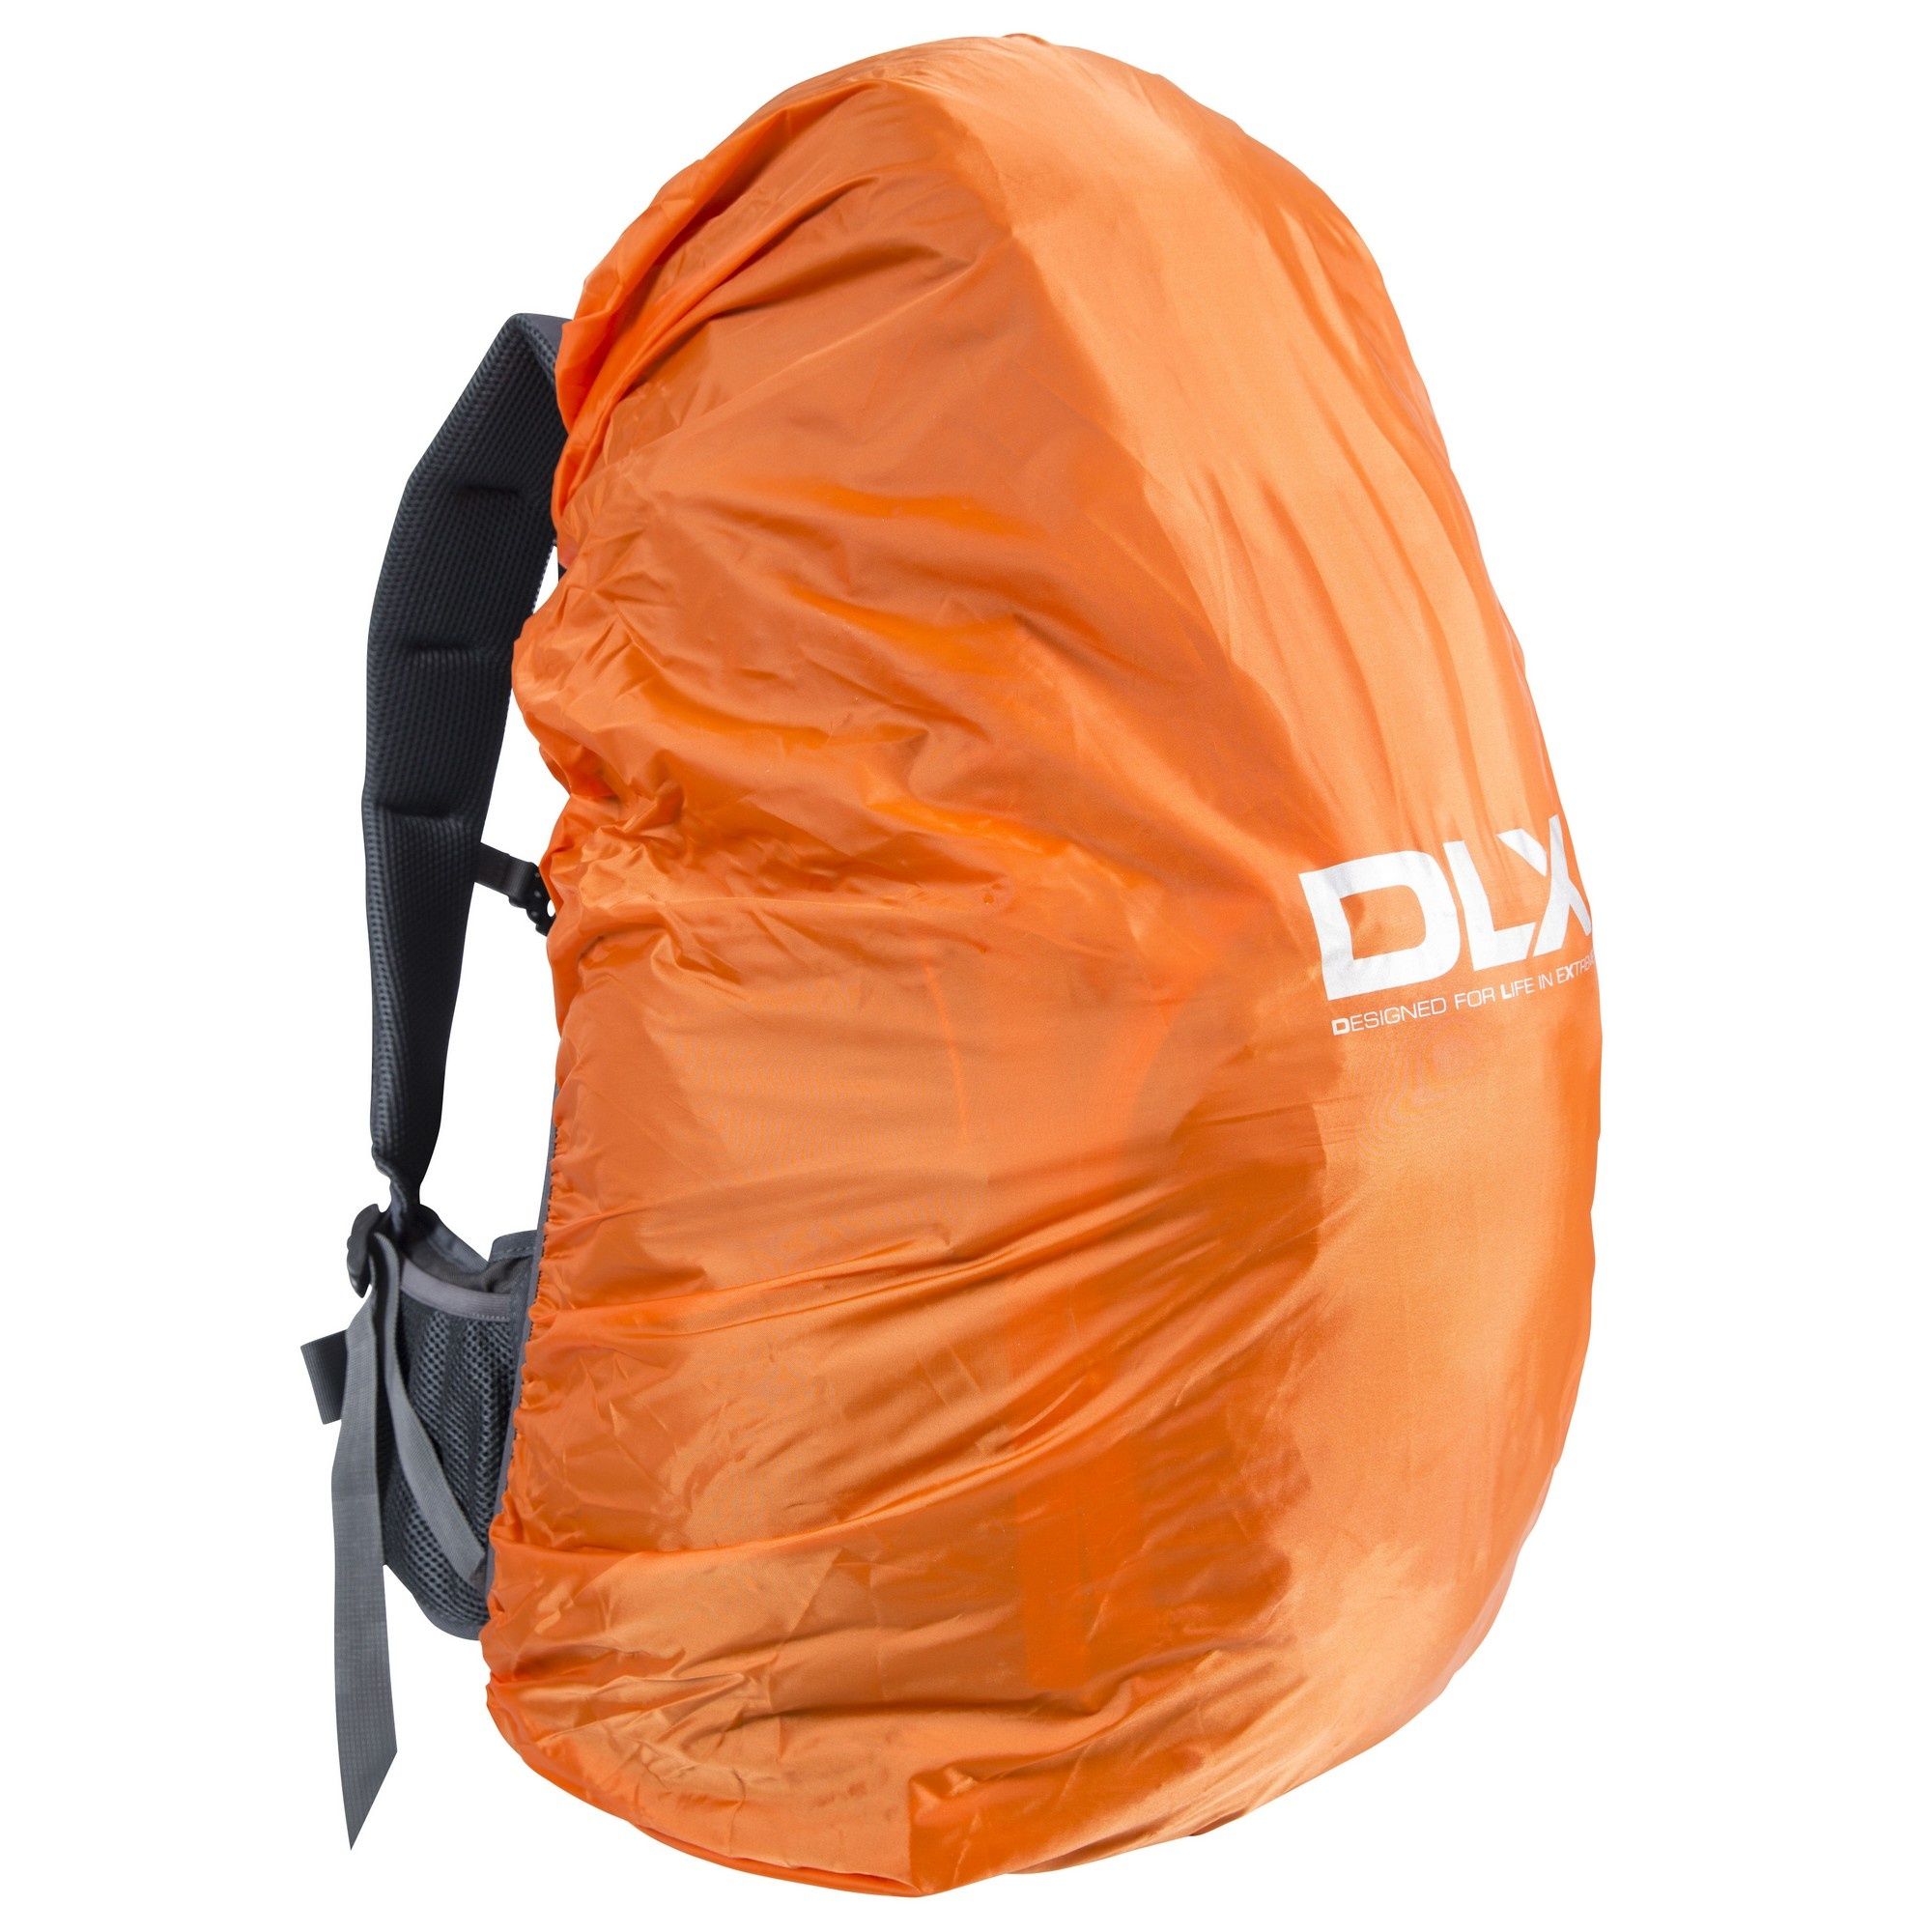 100% 420D polyester. 70 litre DLX rucksack. Airflow system. Trekking pole loops. Ice axe loops. Hydration pack access. 2000mm waterproof raincover.